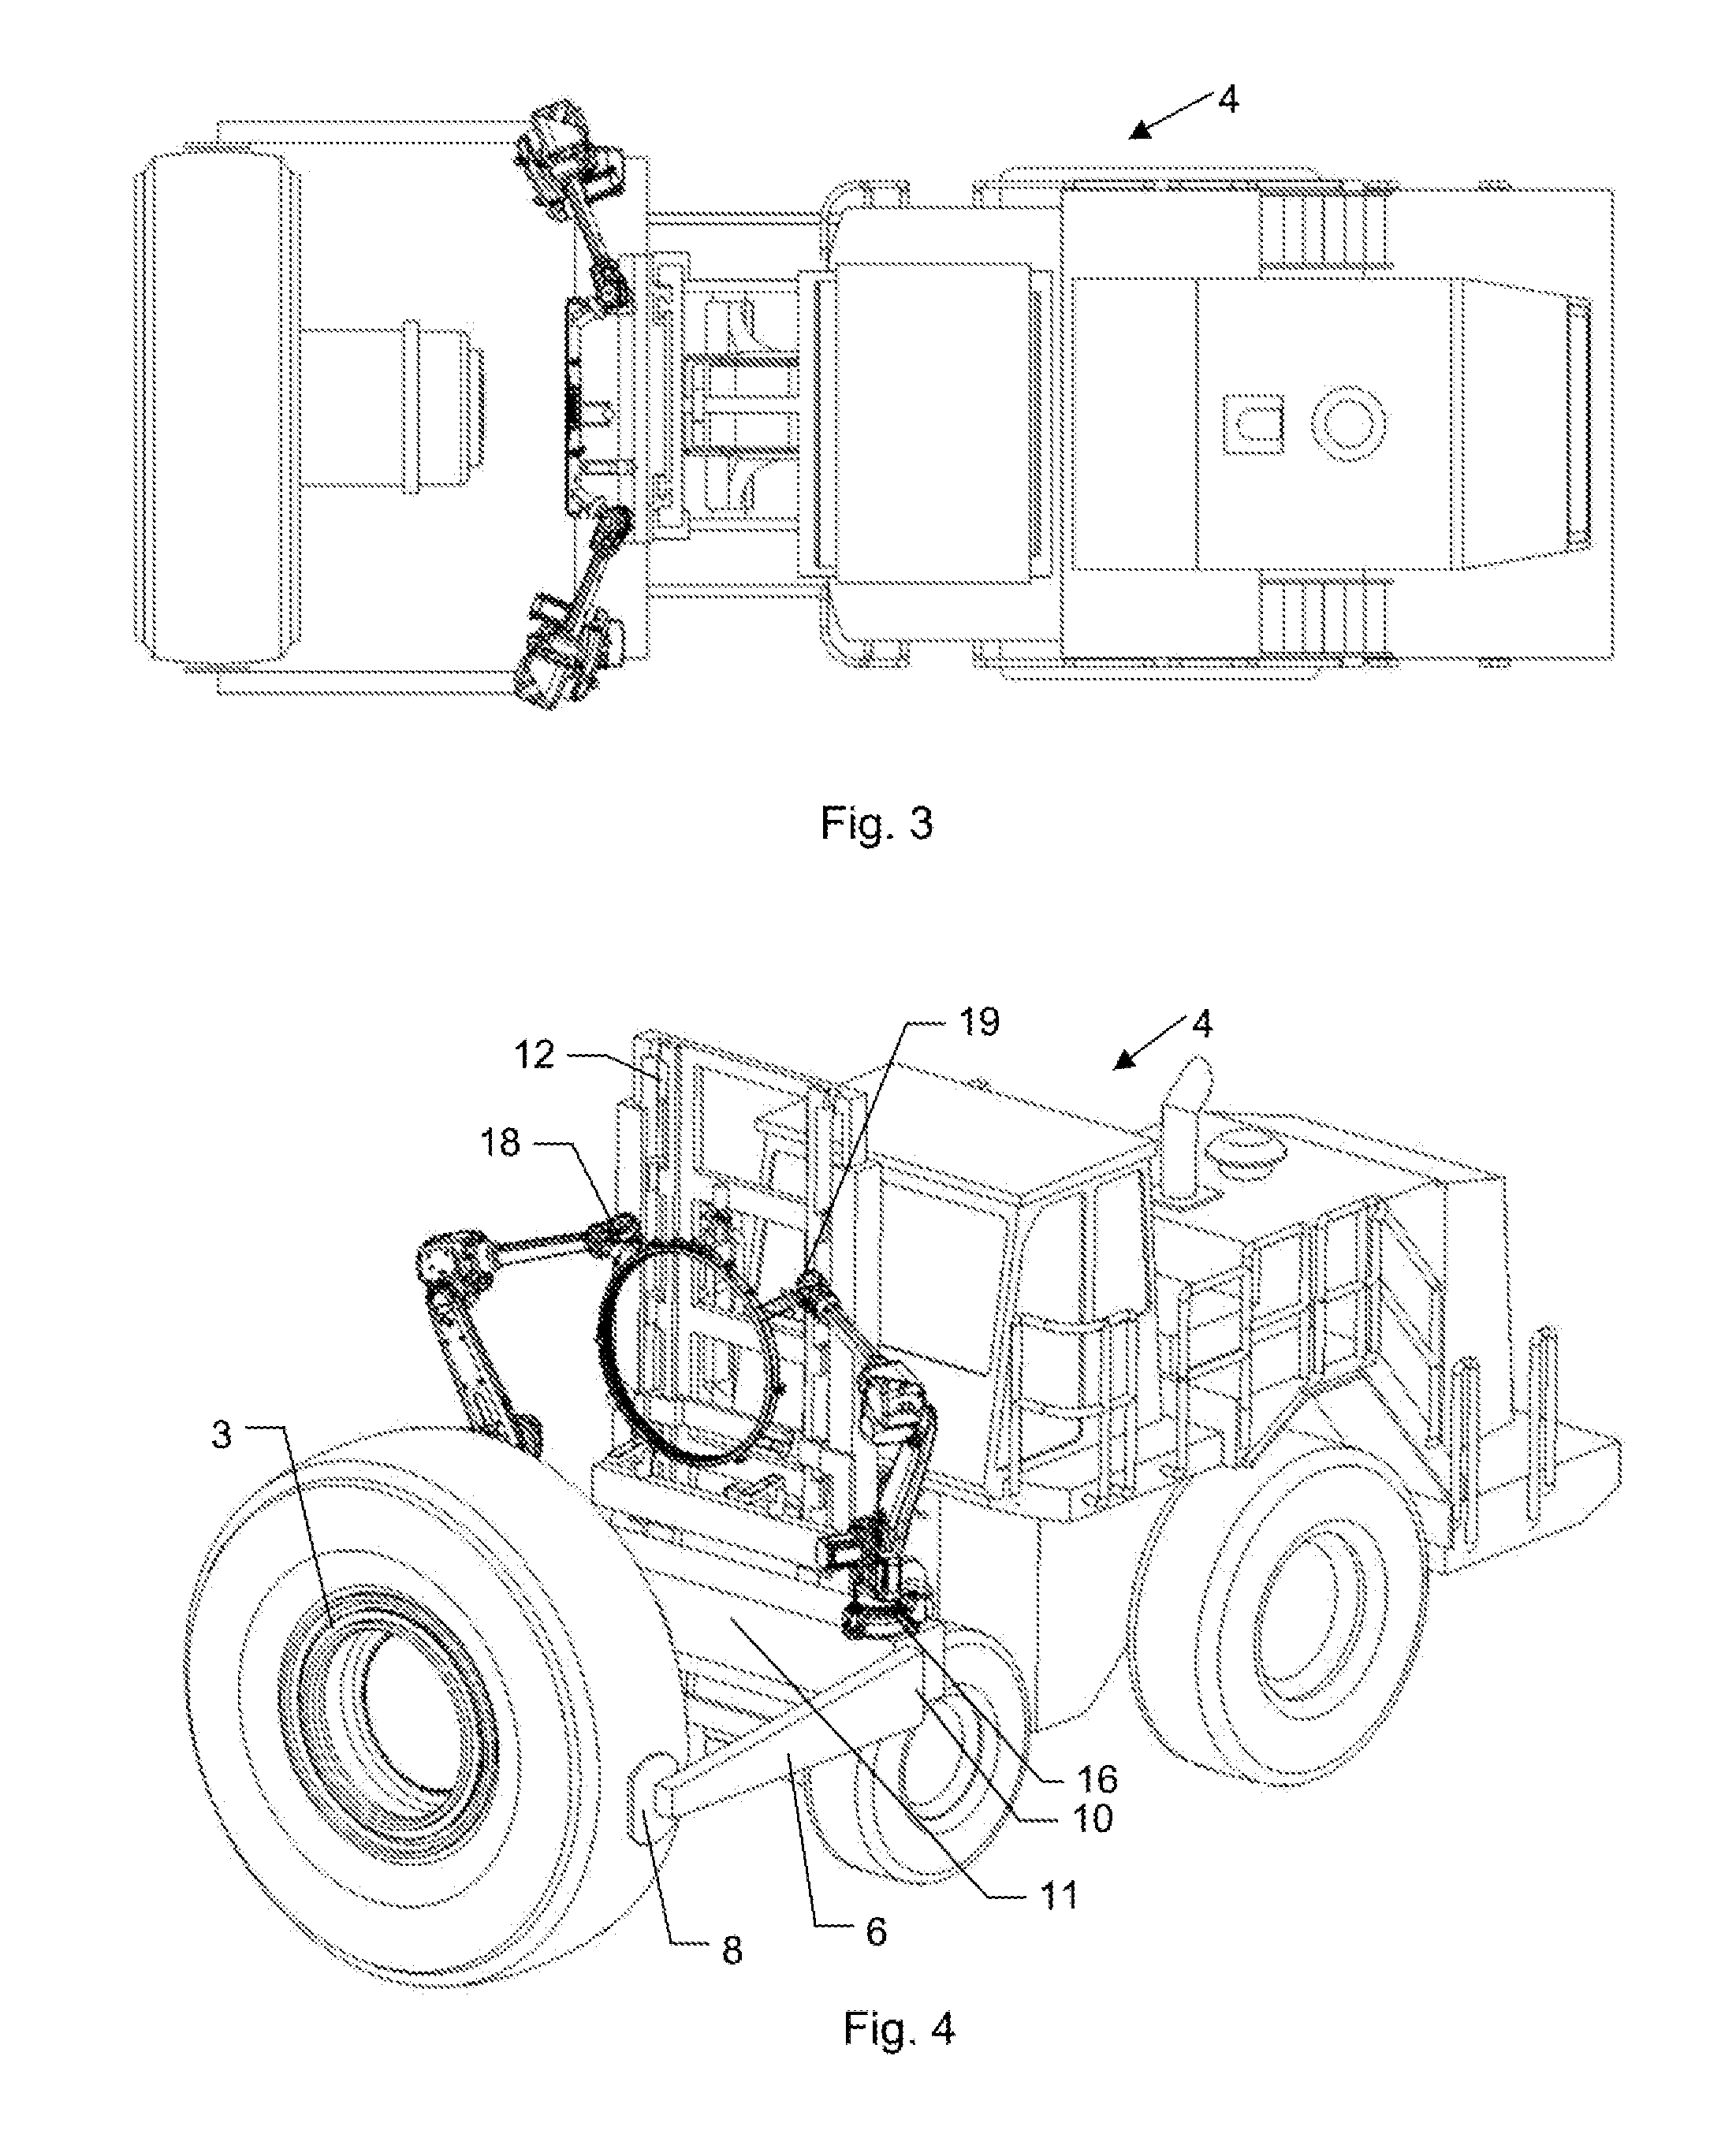 Robotic tyre changing apparatus and associated hardware and methods